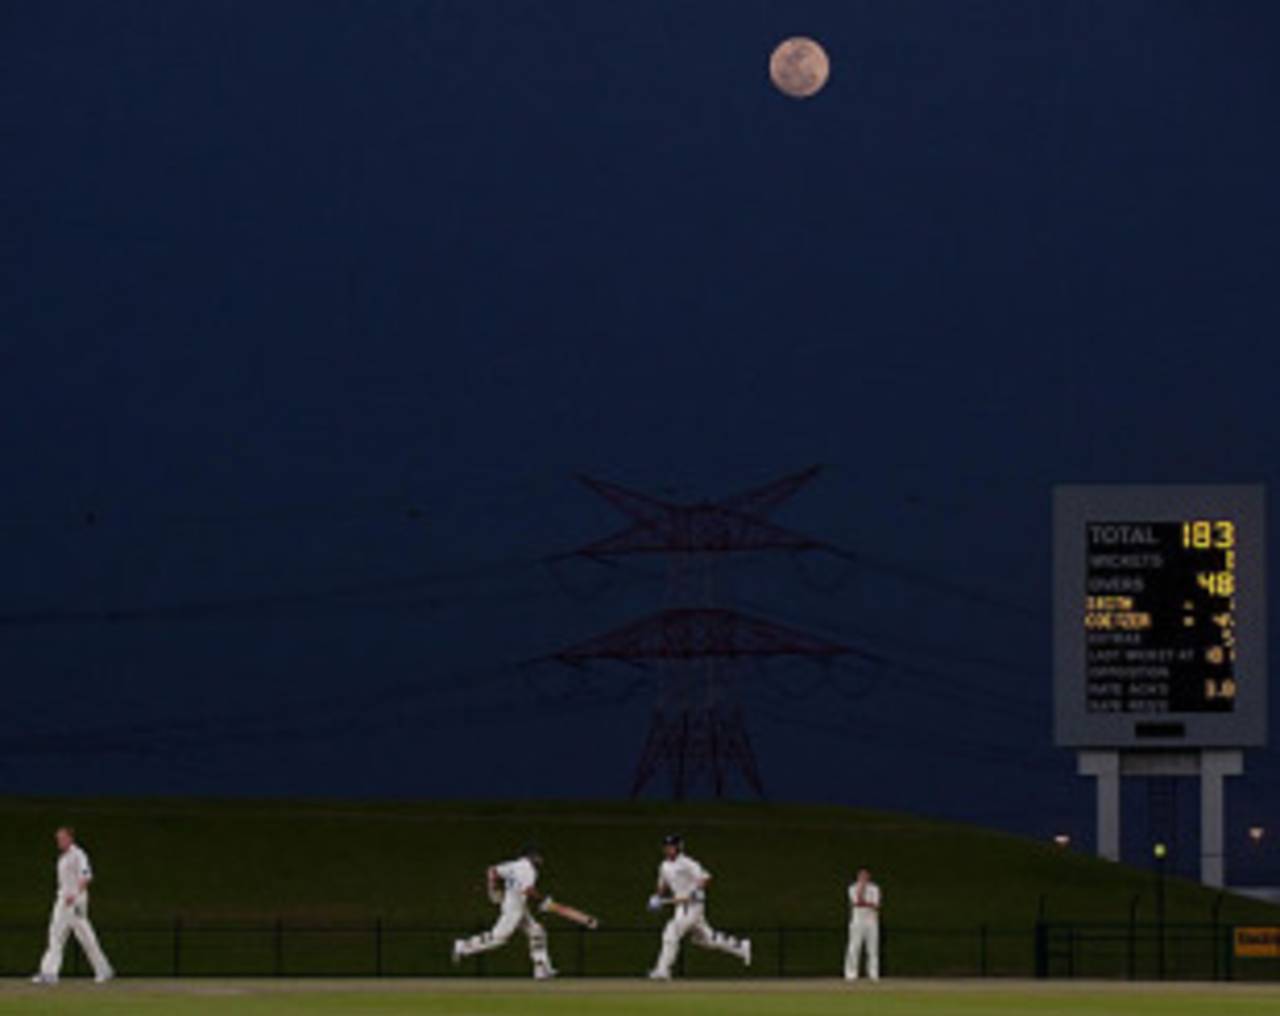 Not quite the start of the season that fans of English domestic cricket are used to&nbsp;&nbsp;&bull;&nbsp;&nbsp;PA Photos